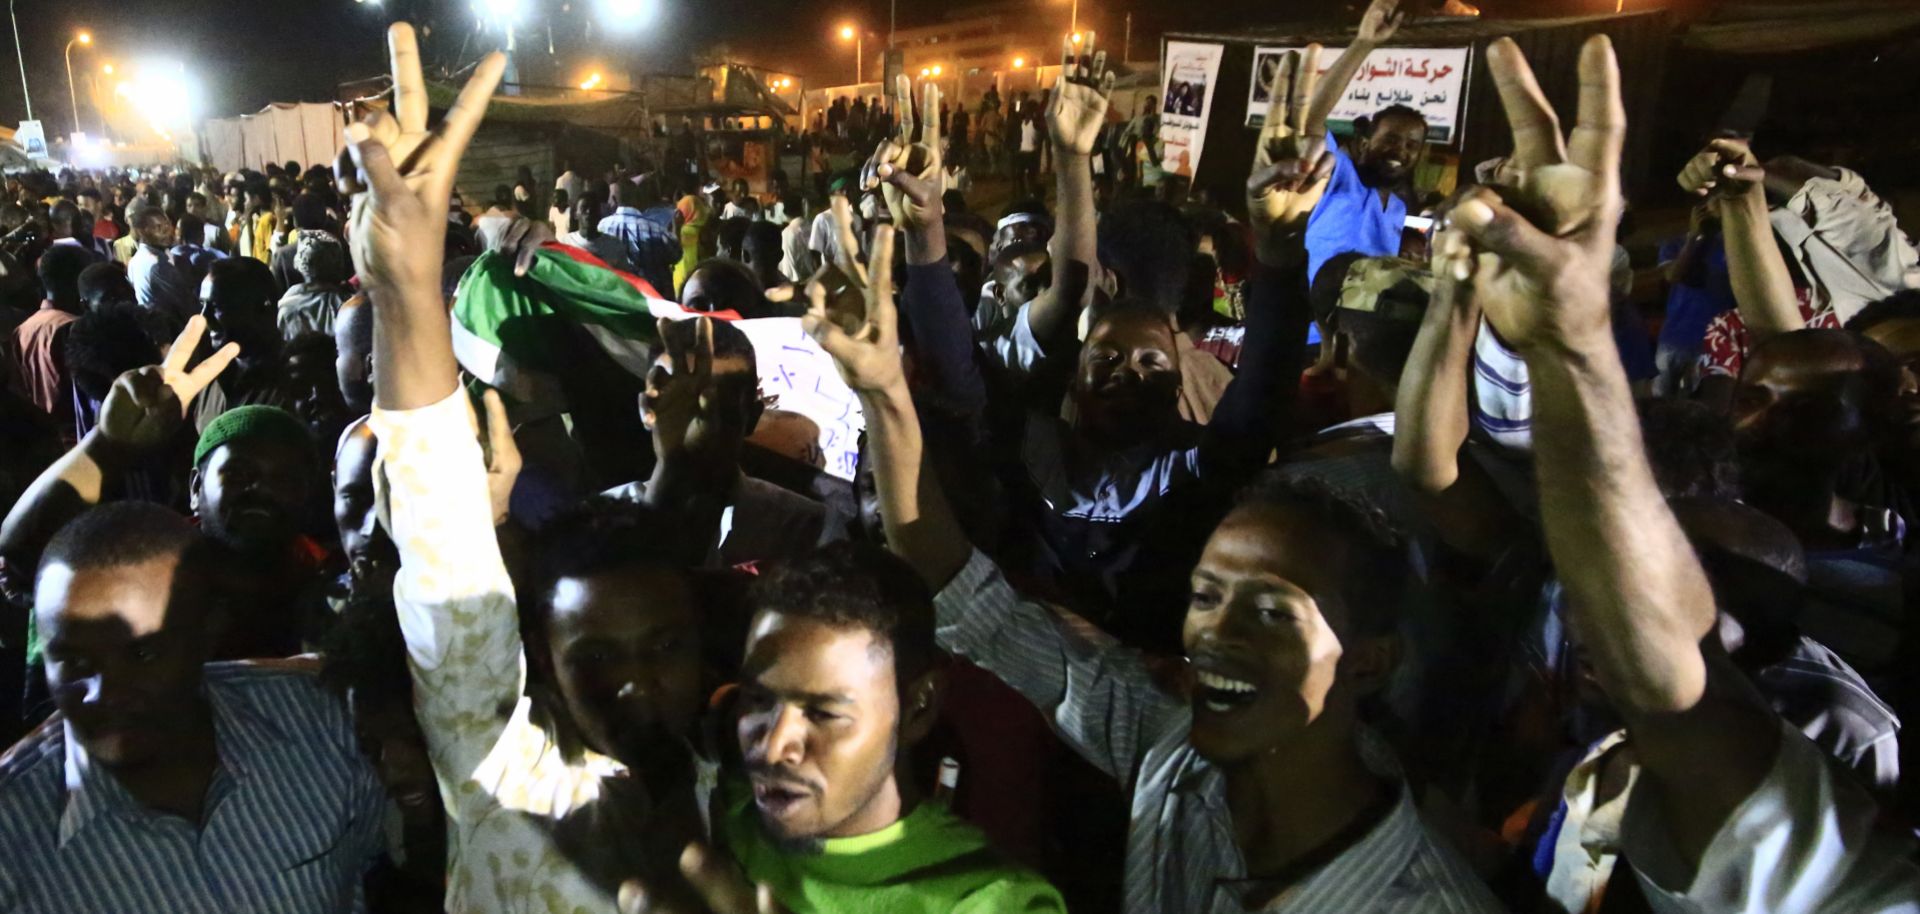 Sudanese celebrate an agreement on a civilian-majority legislative body following the removal of authoritarian leader Omar al Bashir in April 2019. The body will be in power for the next three years, after which, elections will be held to allow citizens to decide on its next composition.